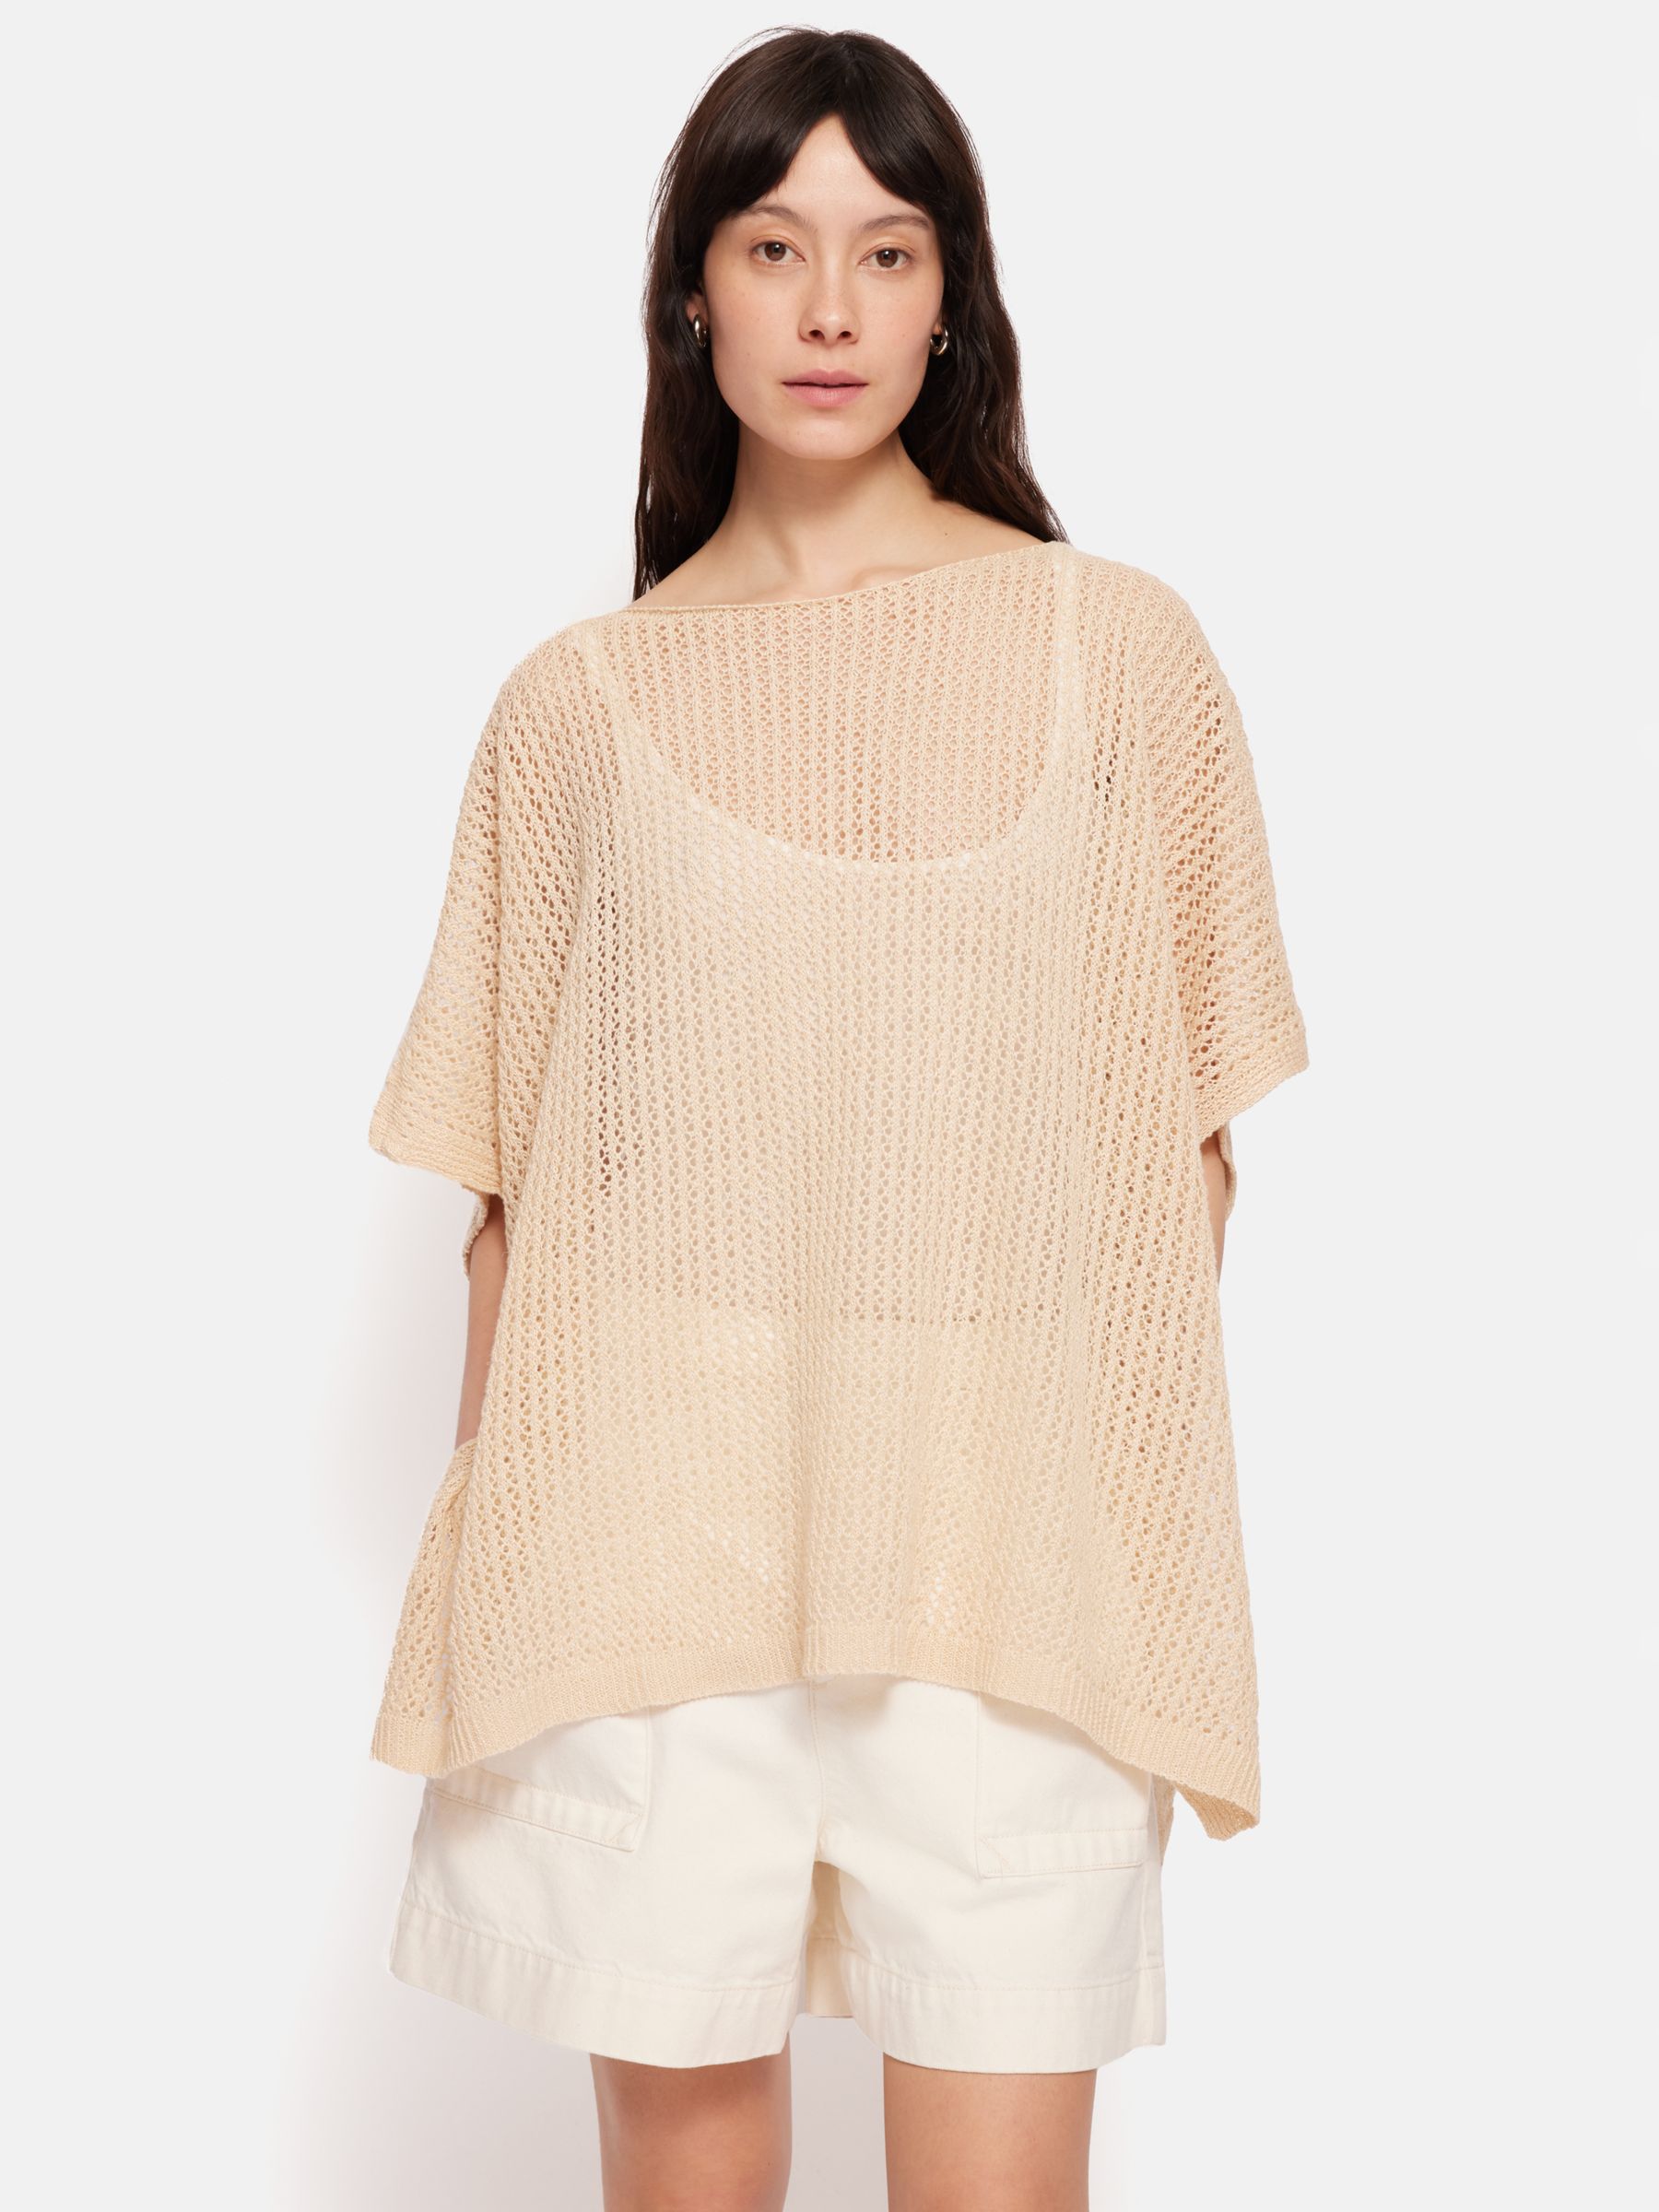 Buy Jigsaw Linen Open Knit Poncho Online at johnlewis.com